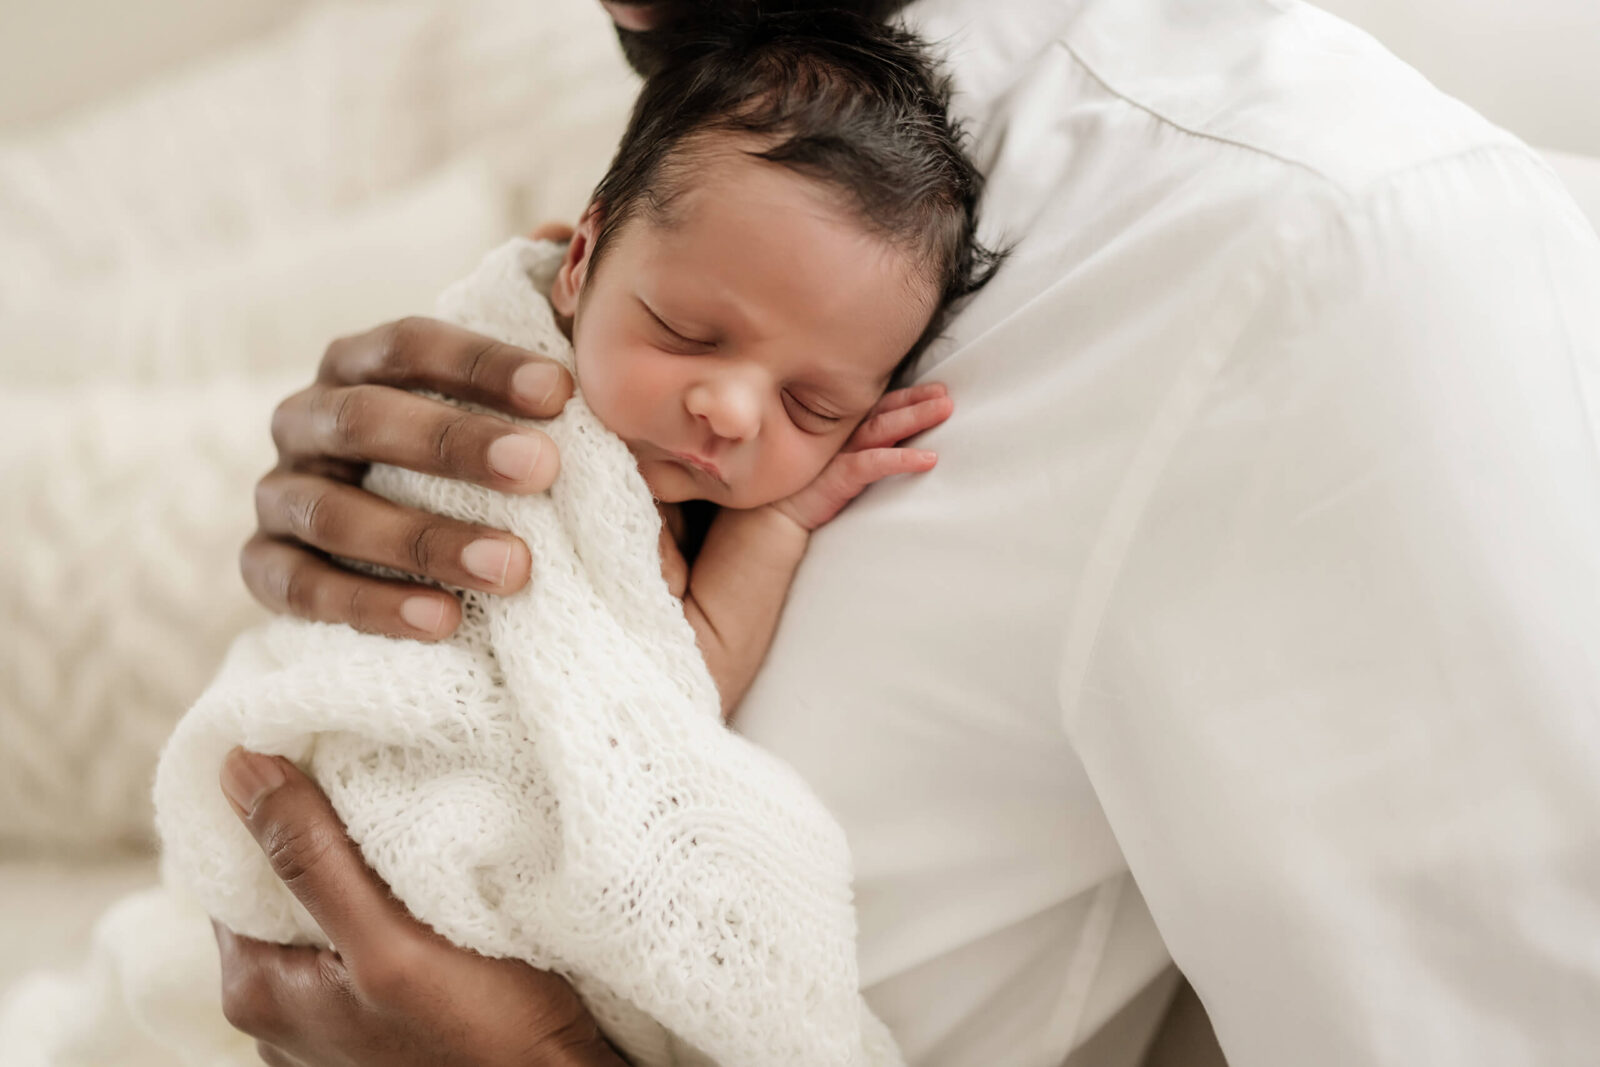 A sample photo from a newborn photoshoot